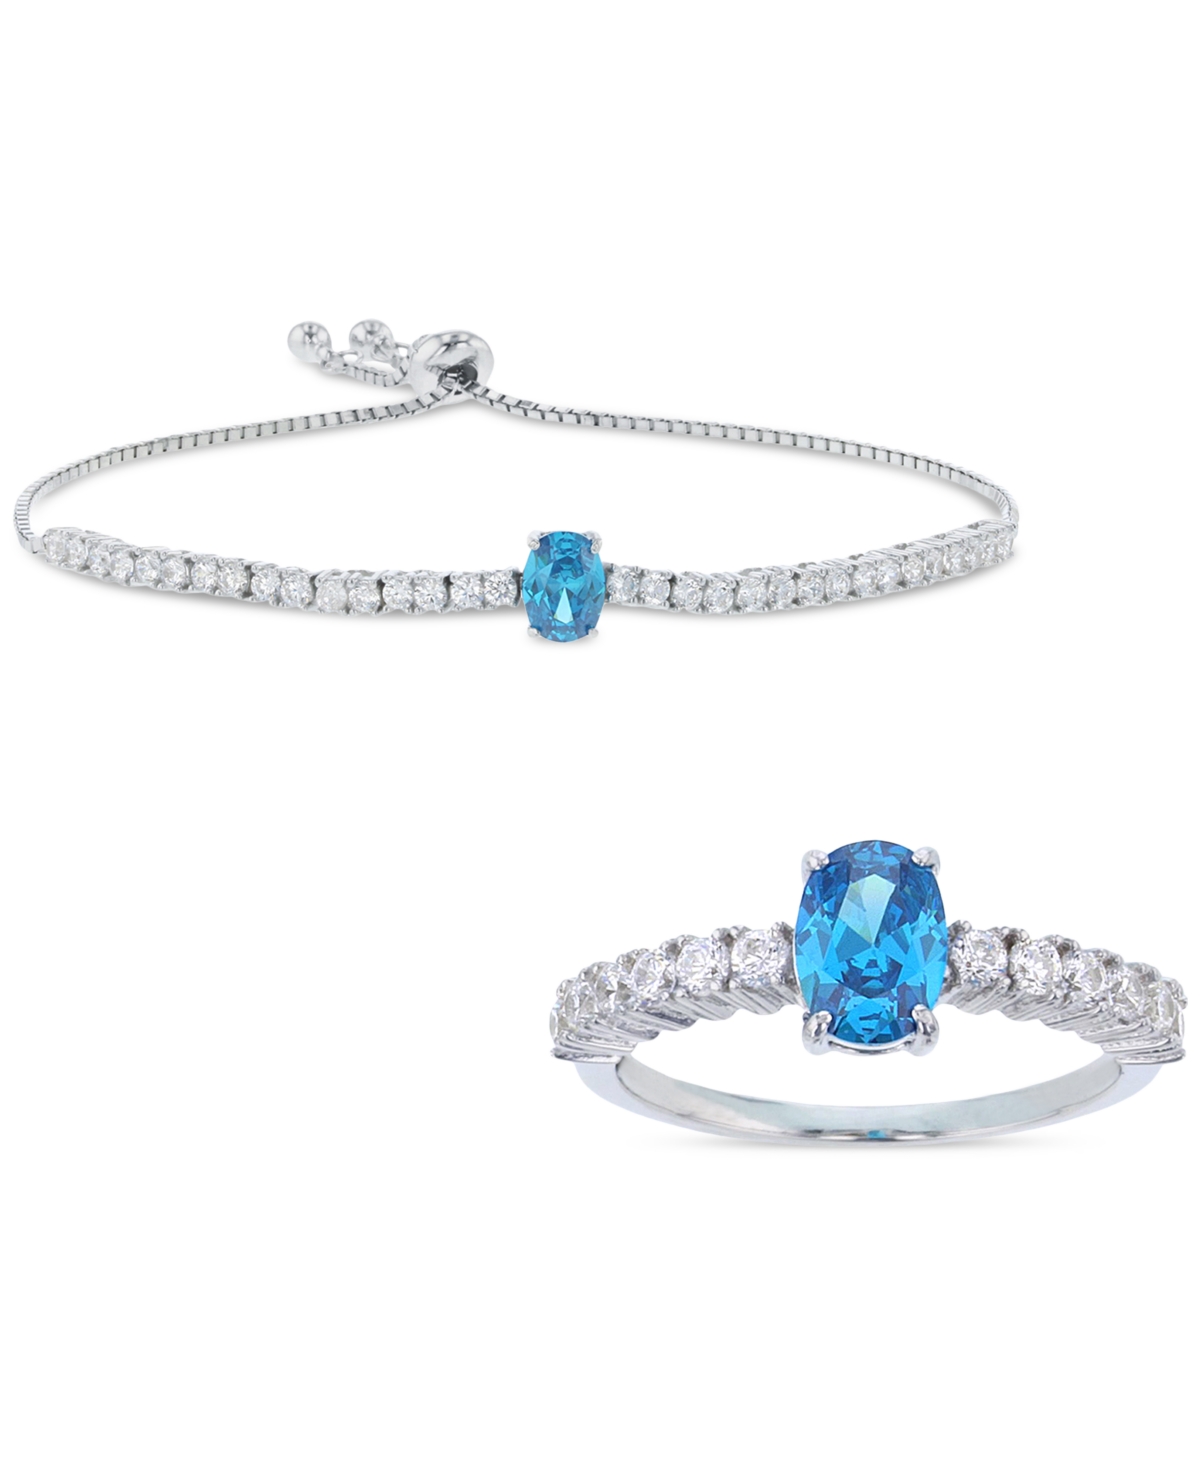 Macy's 2-pc. Set Blue & White Cubic Zirconia Ring & Matching Bolo Bracelet In Sterling Silver